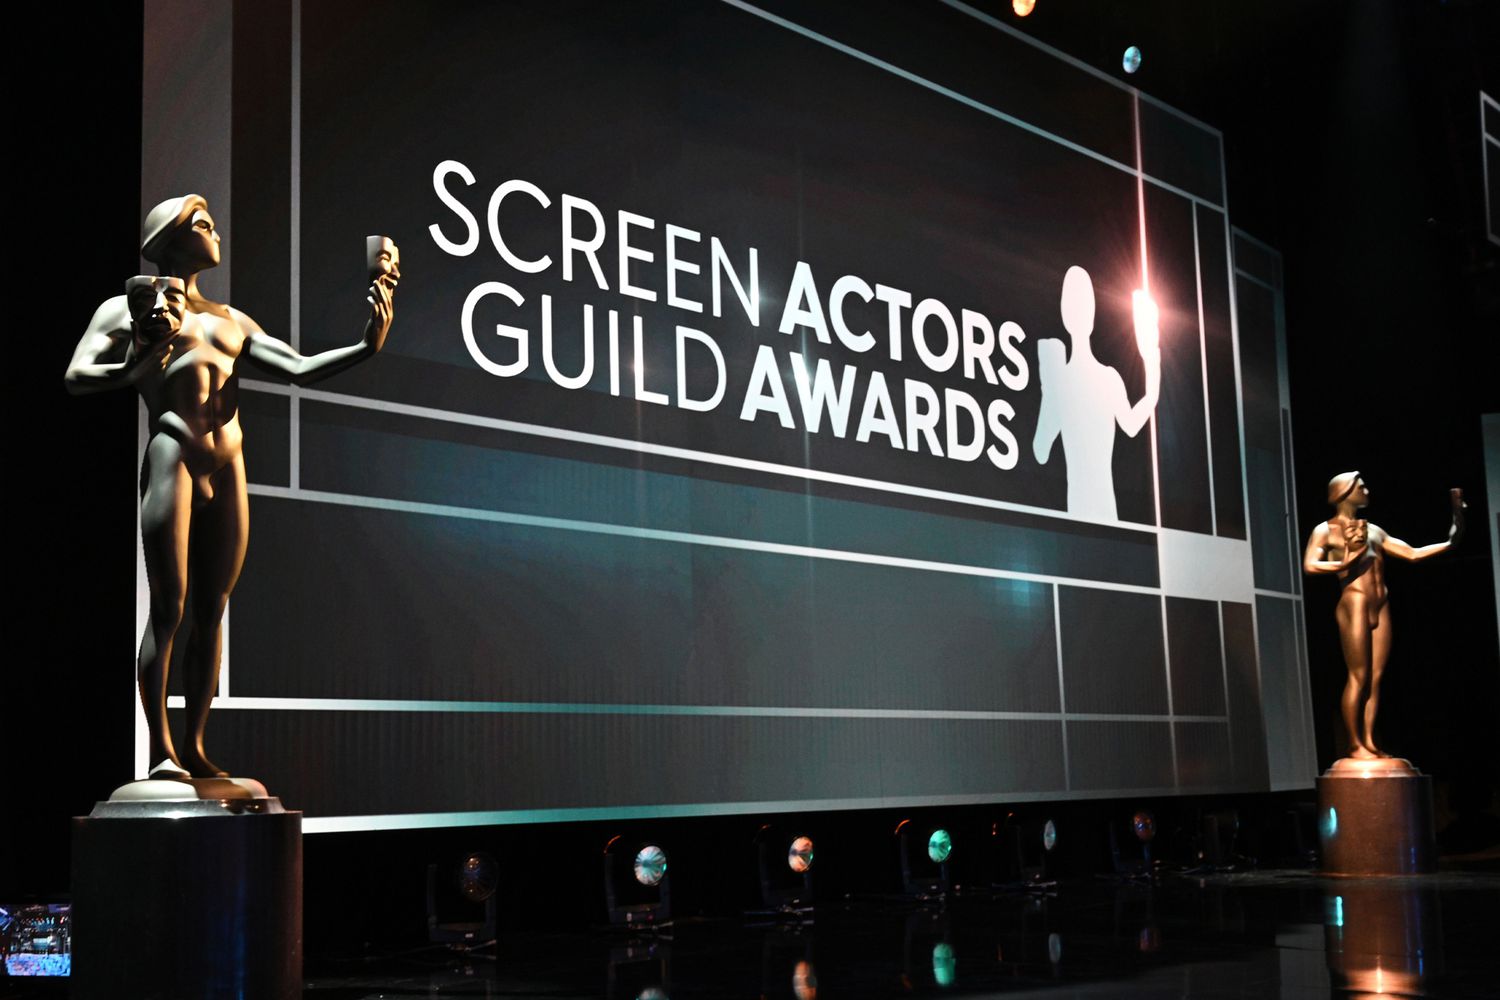 SAG award statues are seen on stage as final preparations are made